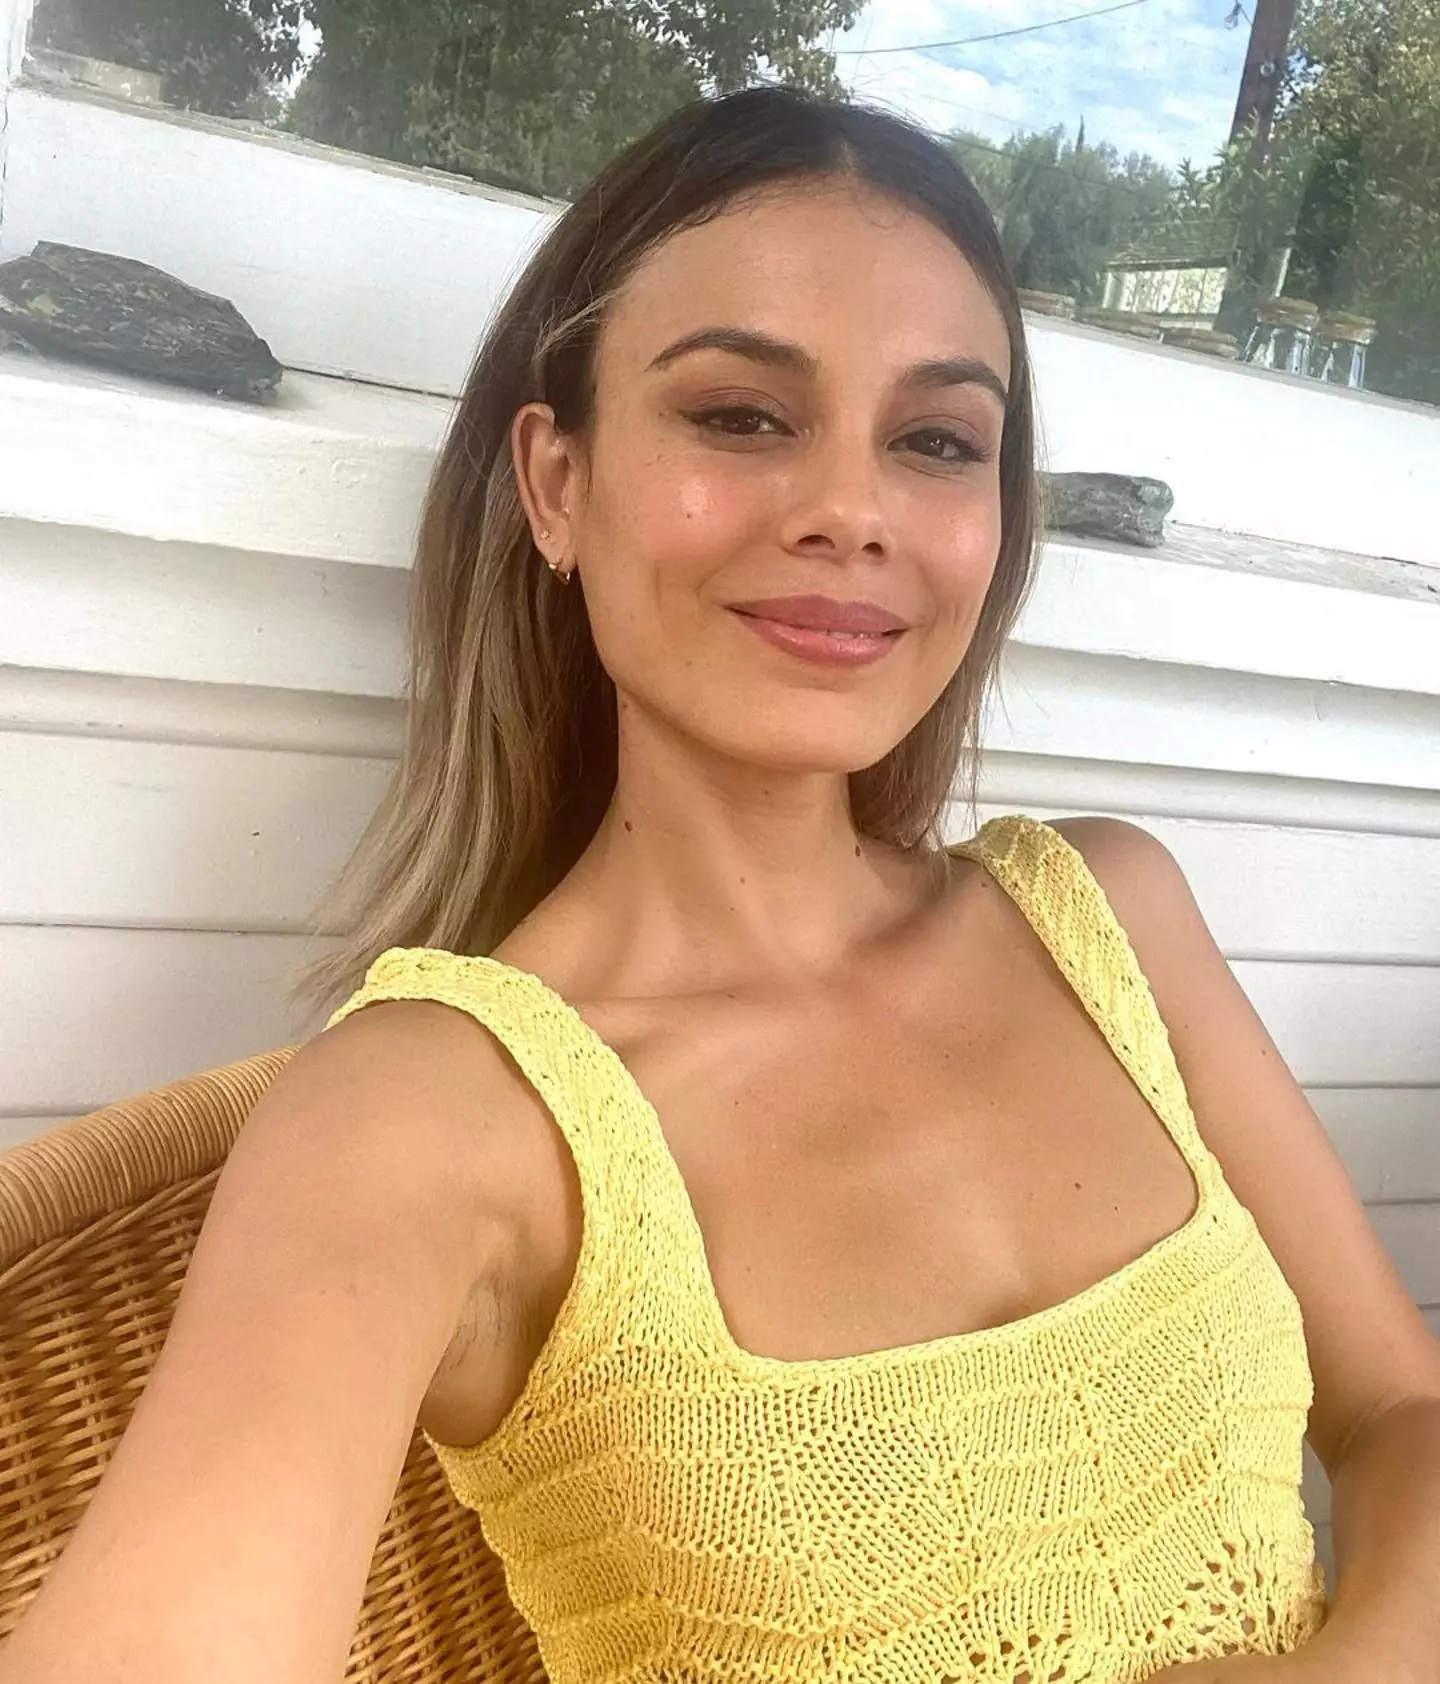 Nathalie Kelley urged non-indigenous people to wear feathers to festivals.